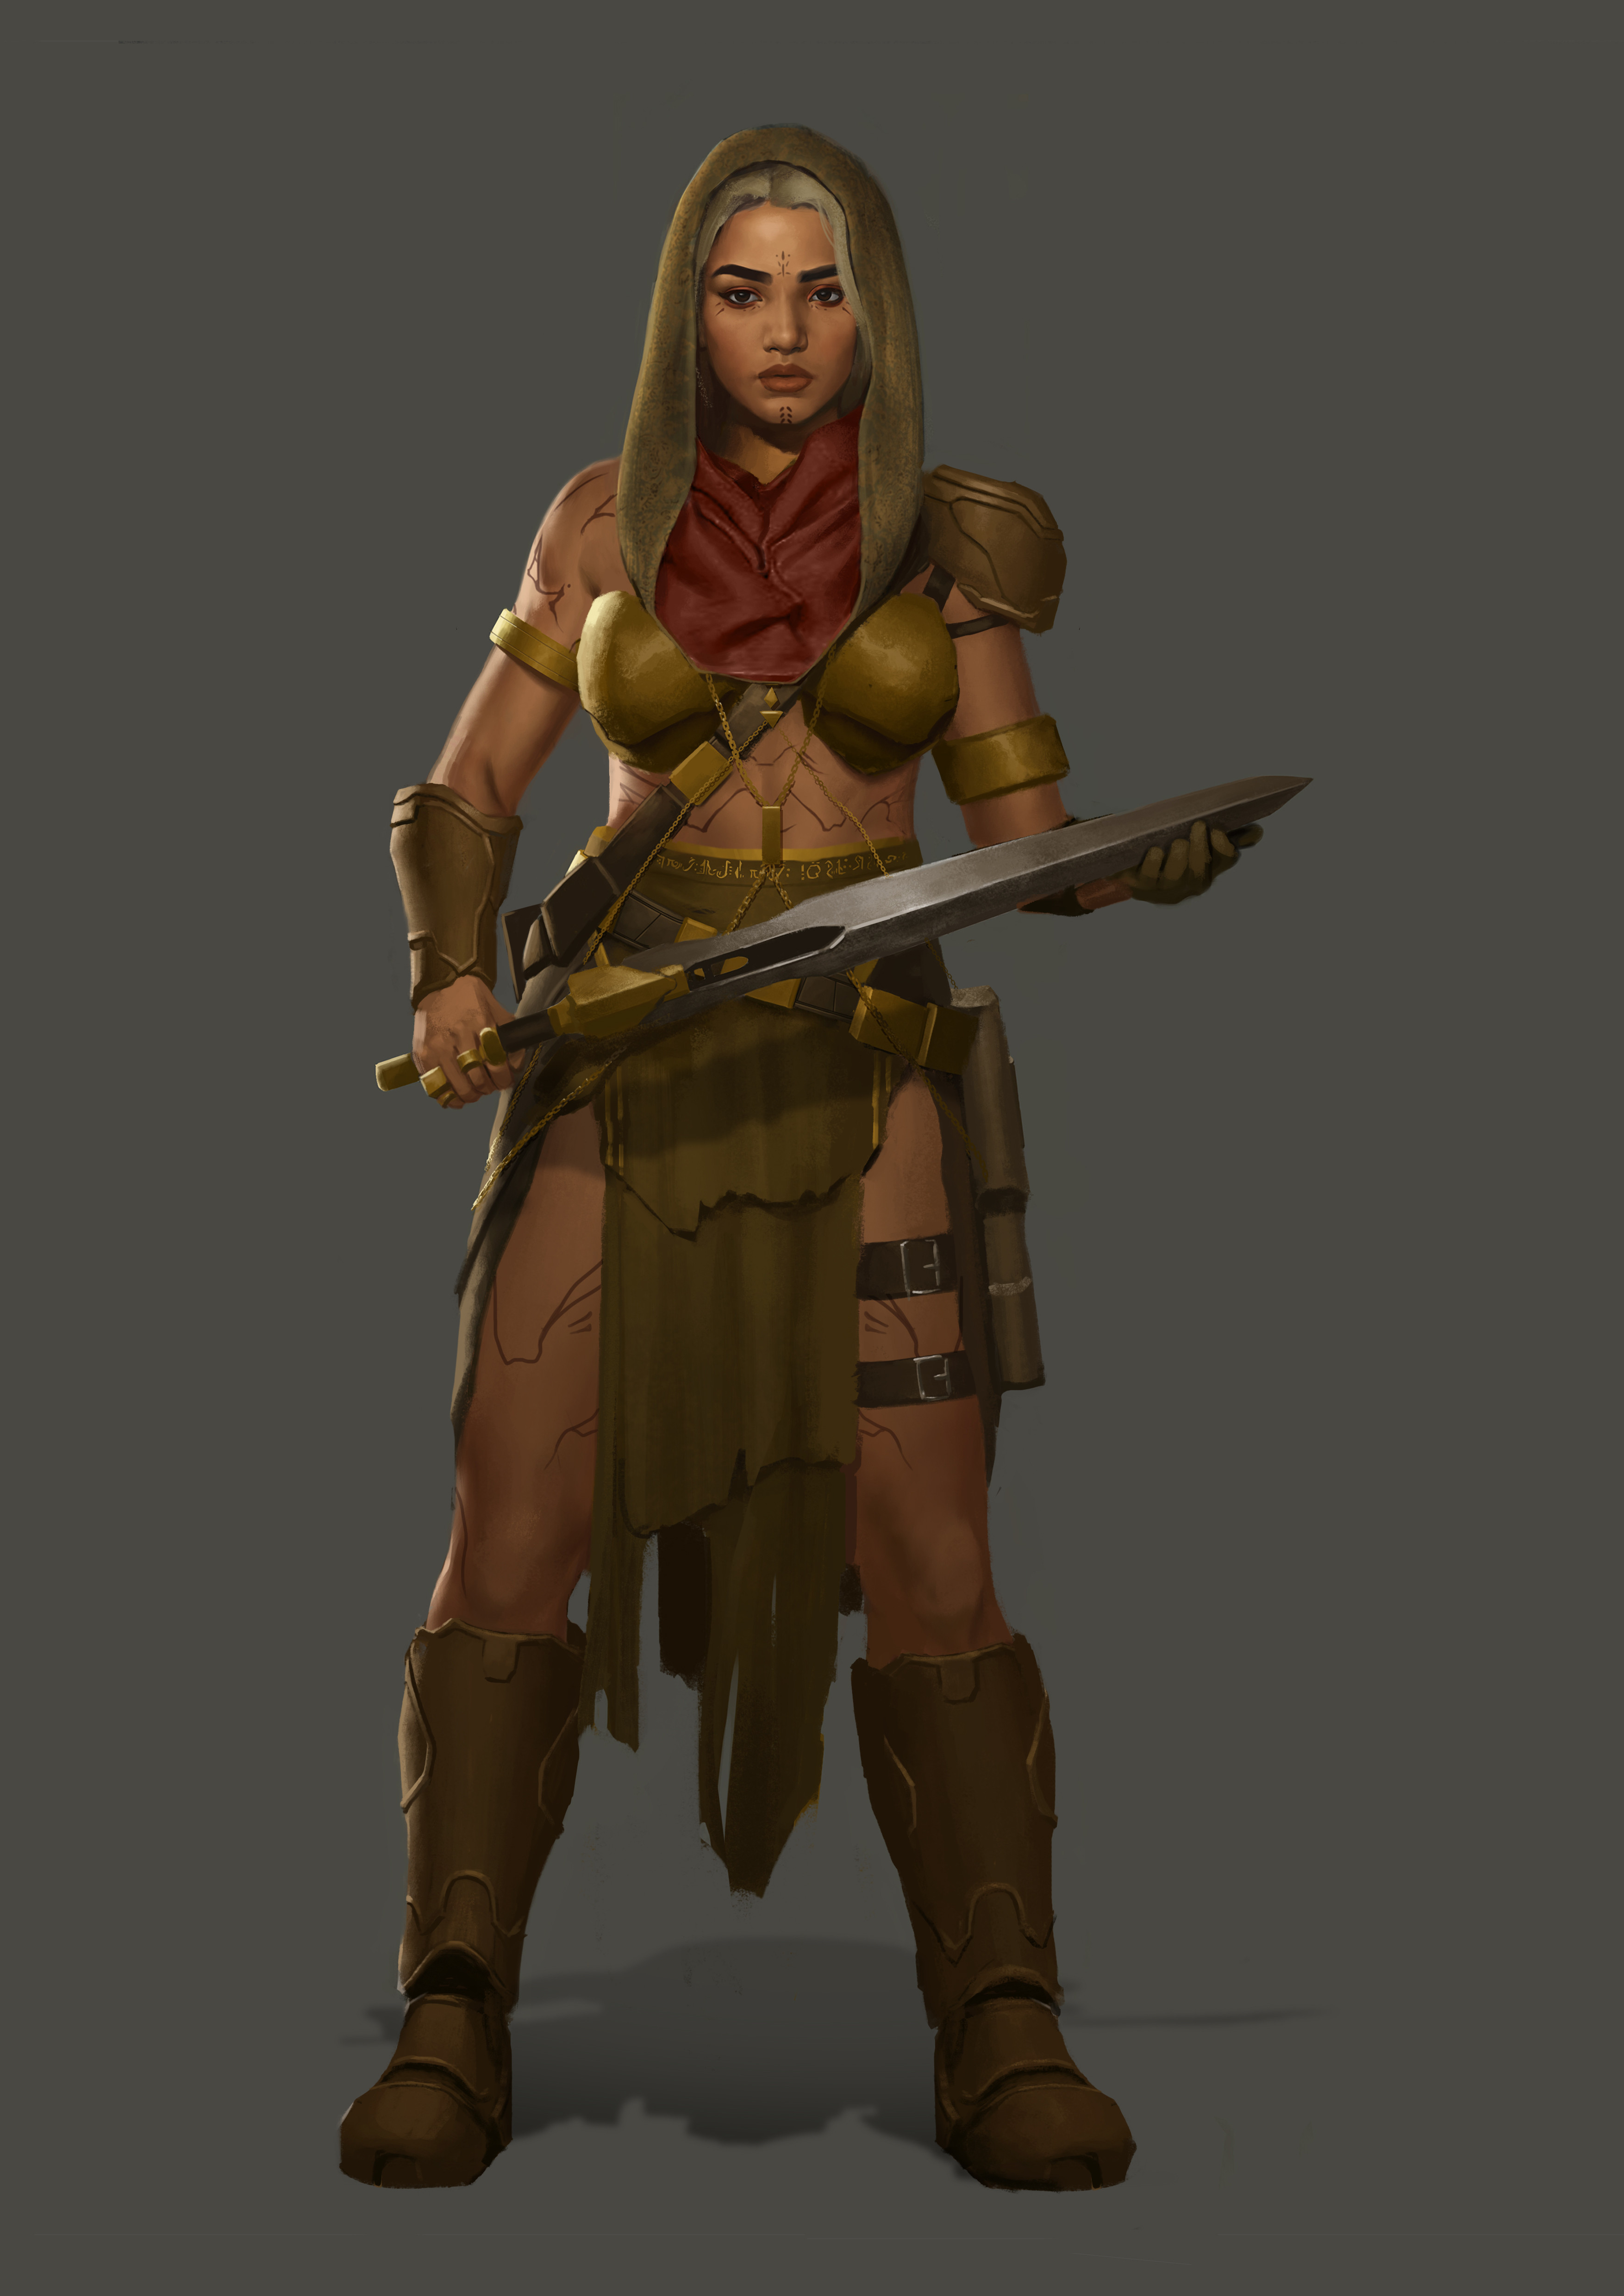 Sci fi Barbarian nomad for a personal project 